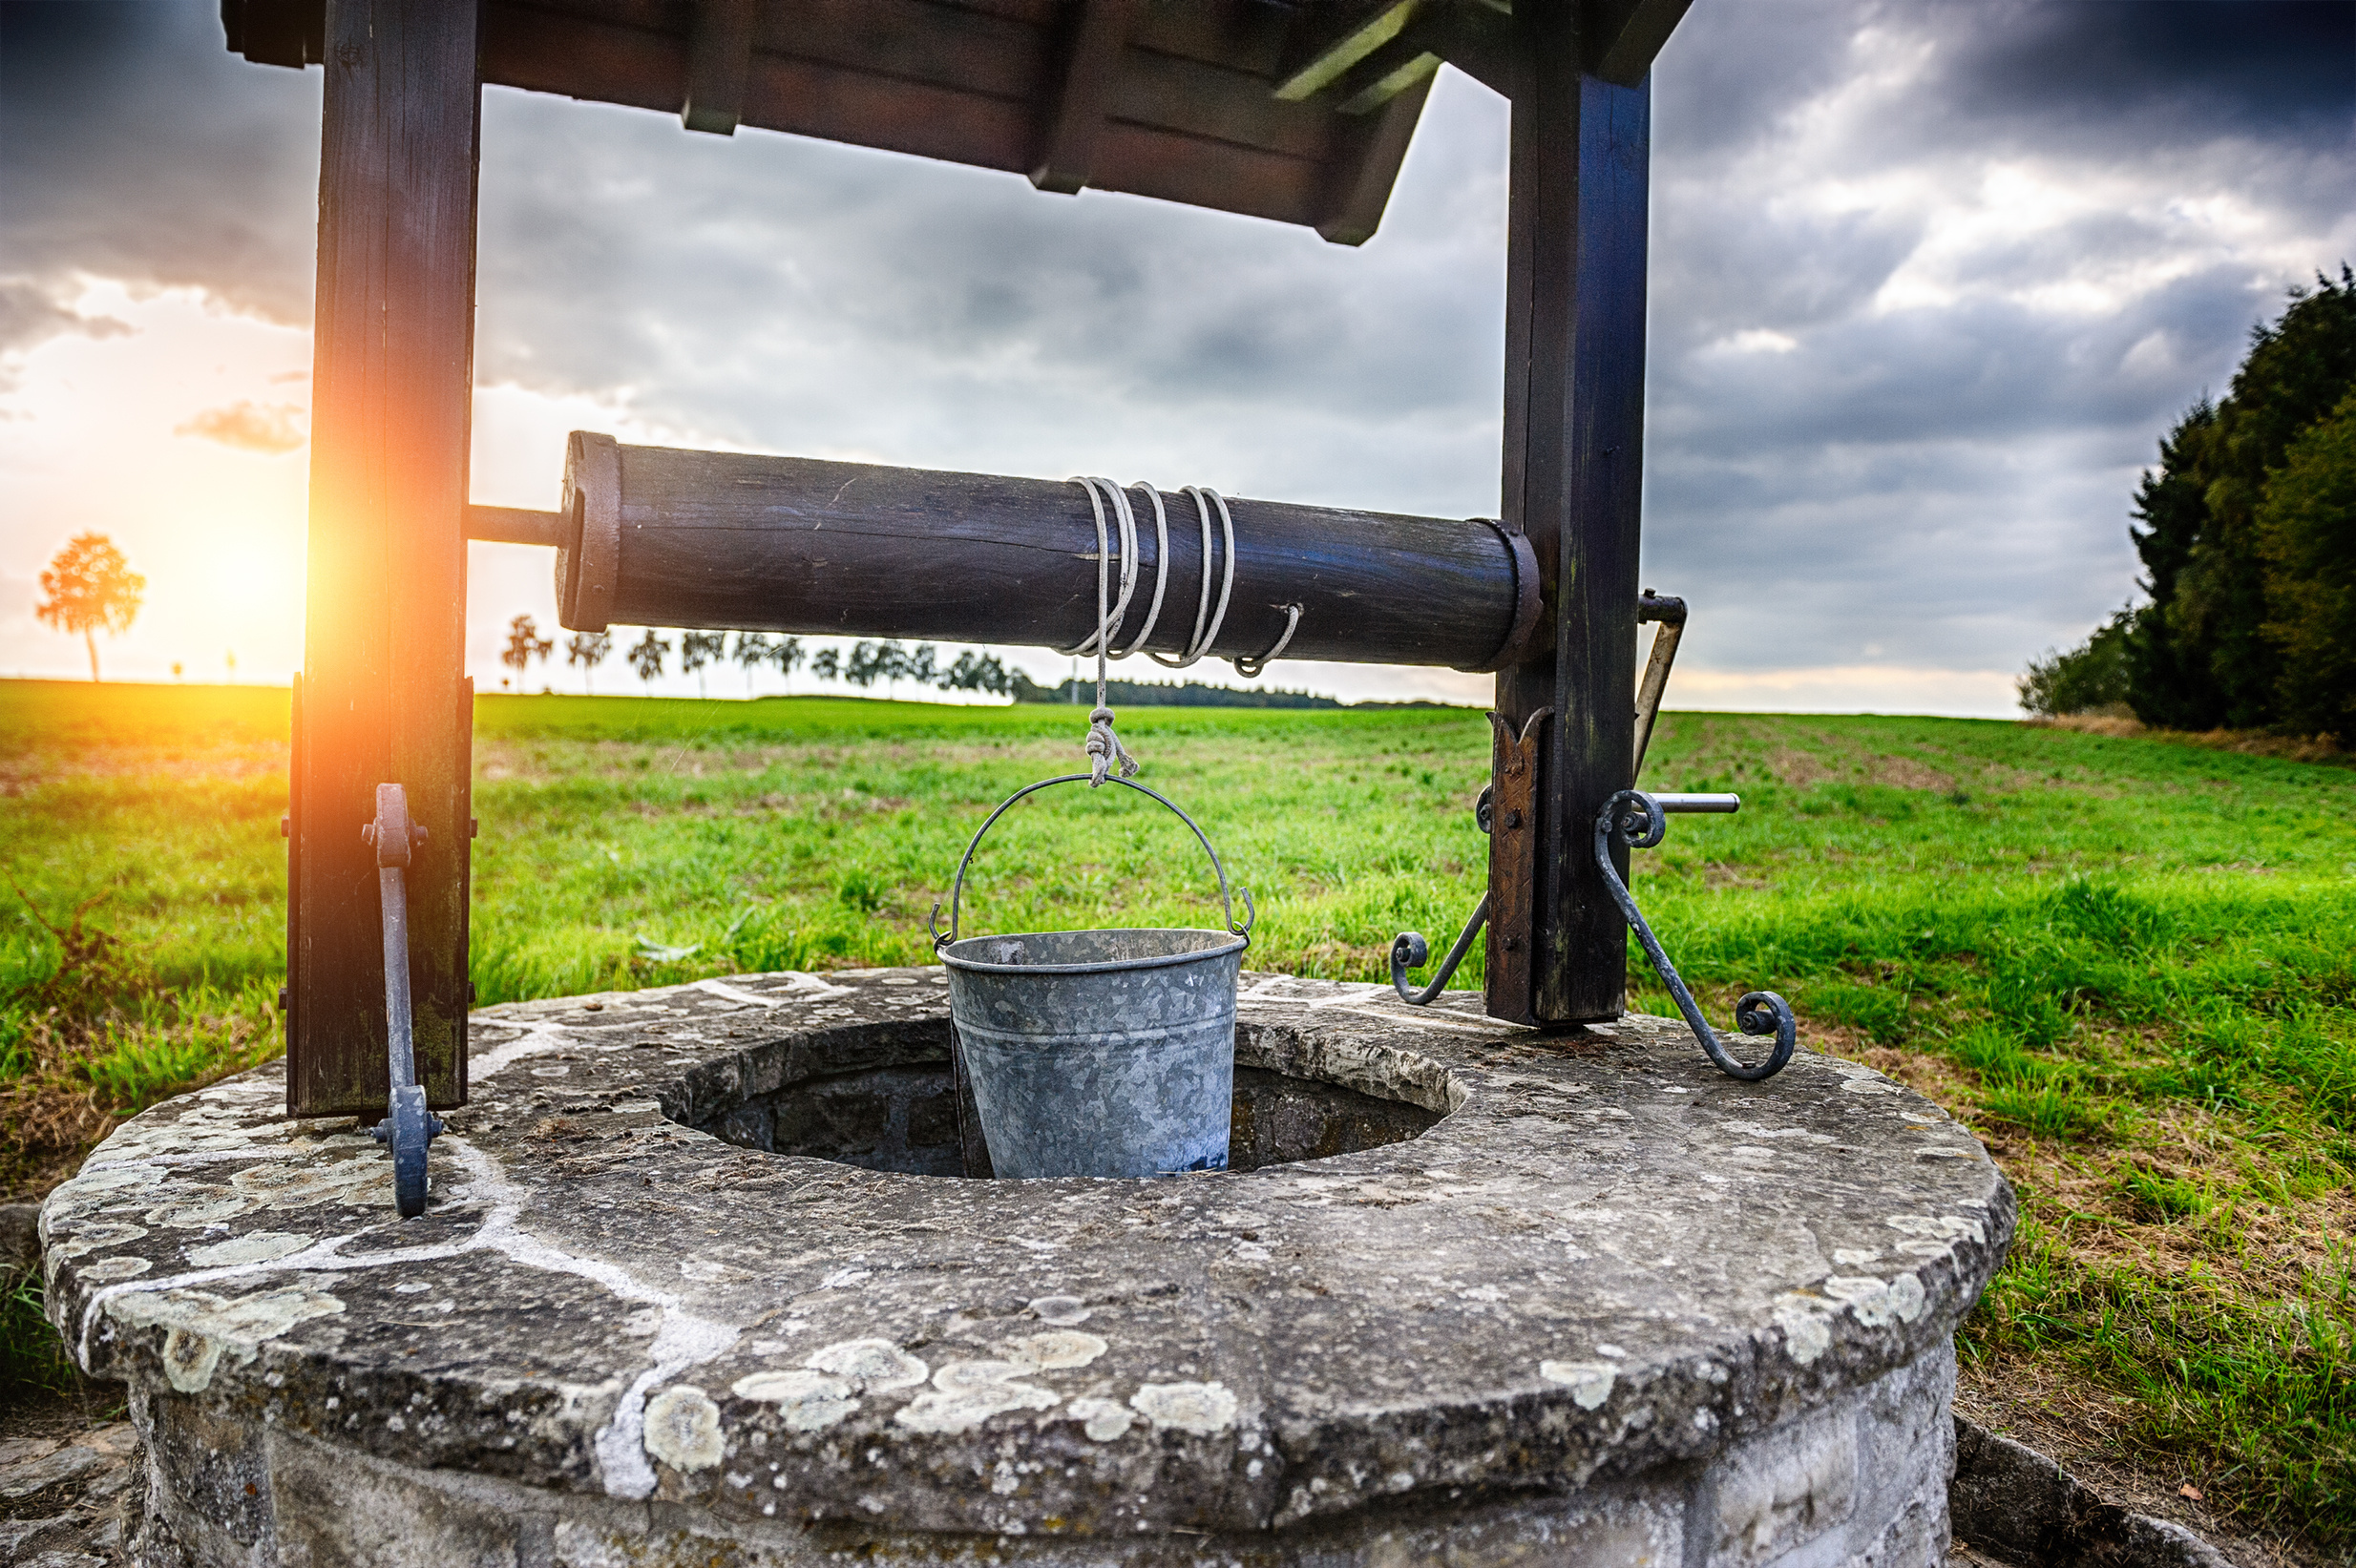 A Homeowner’s Guide To Well Water Systems